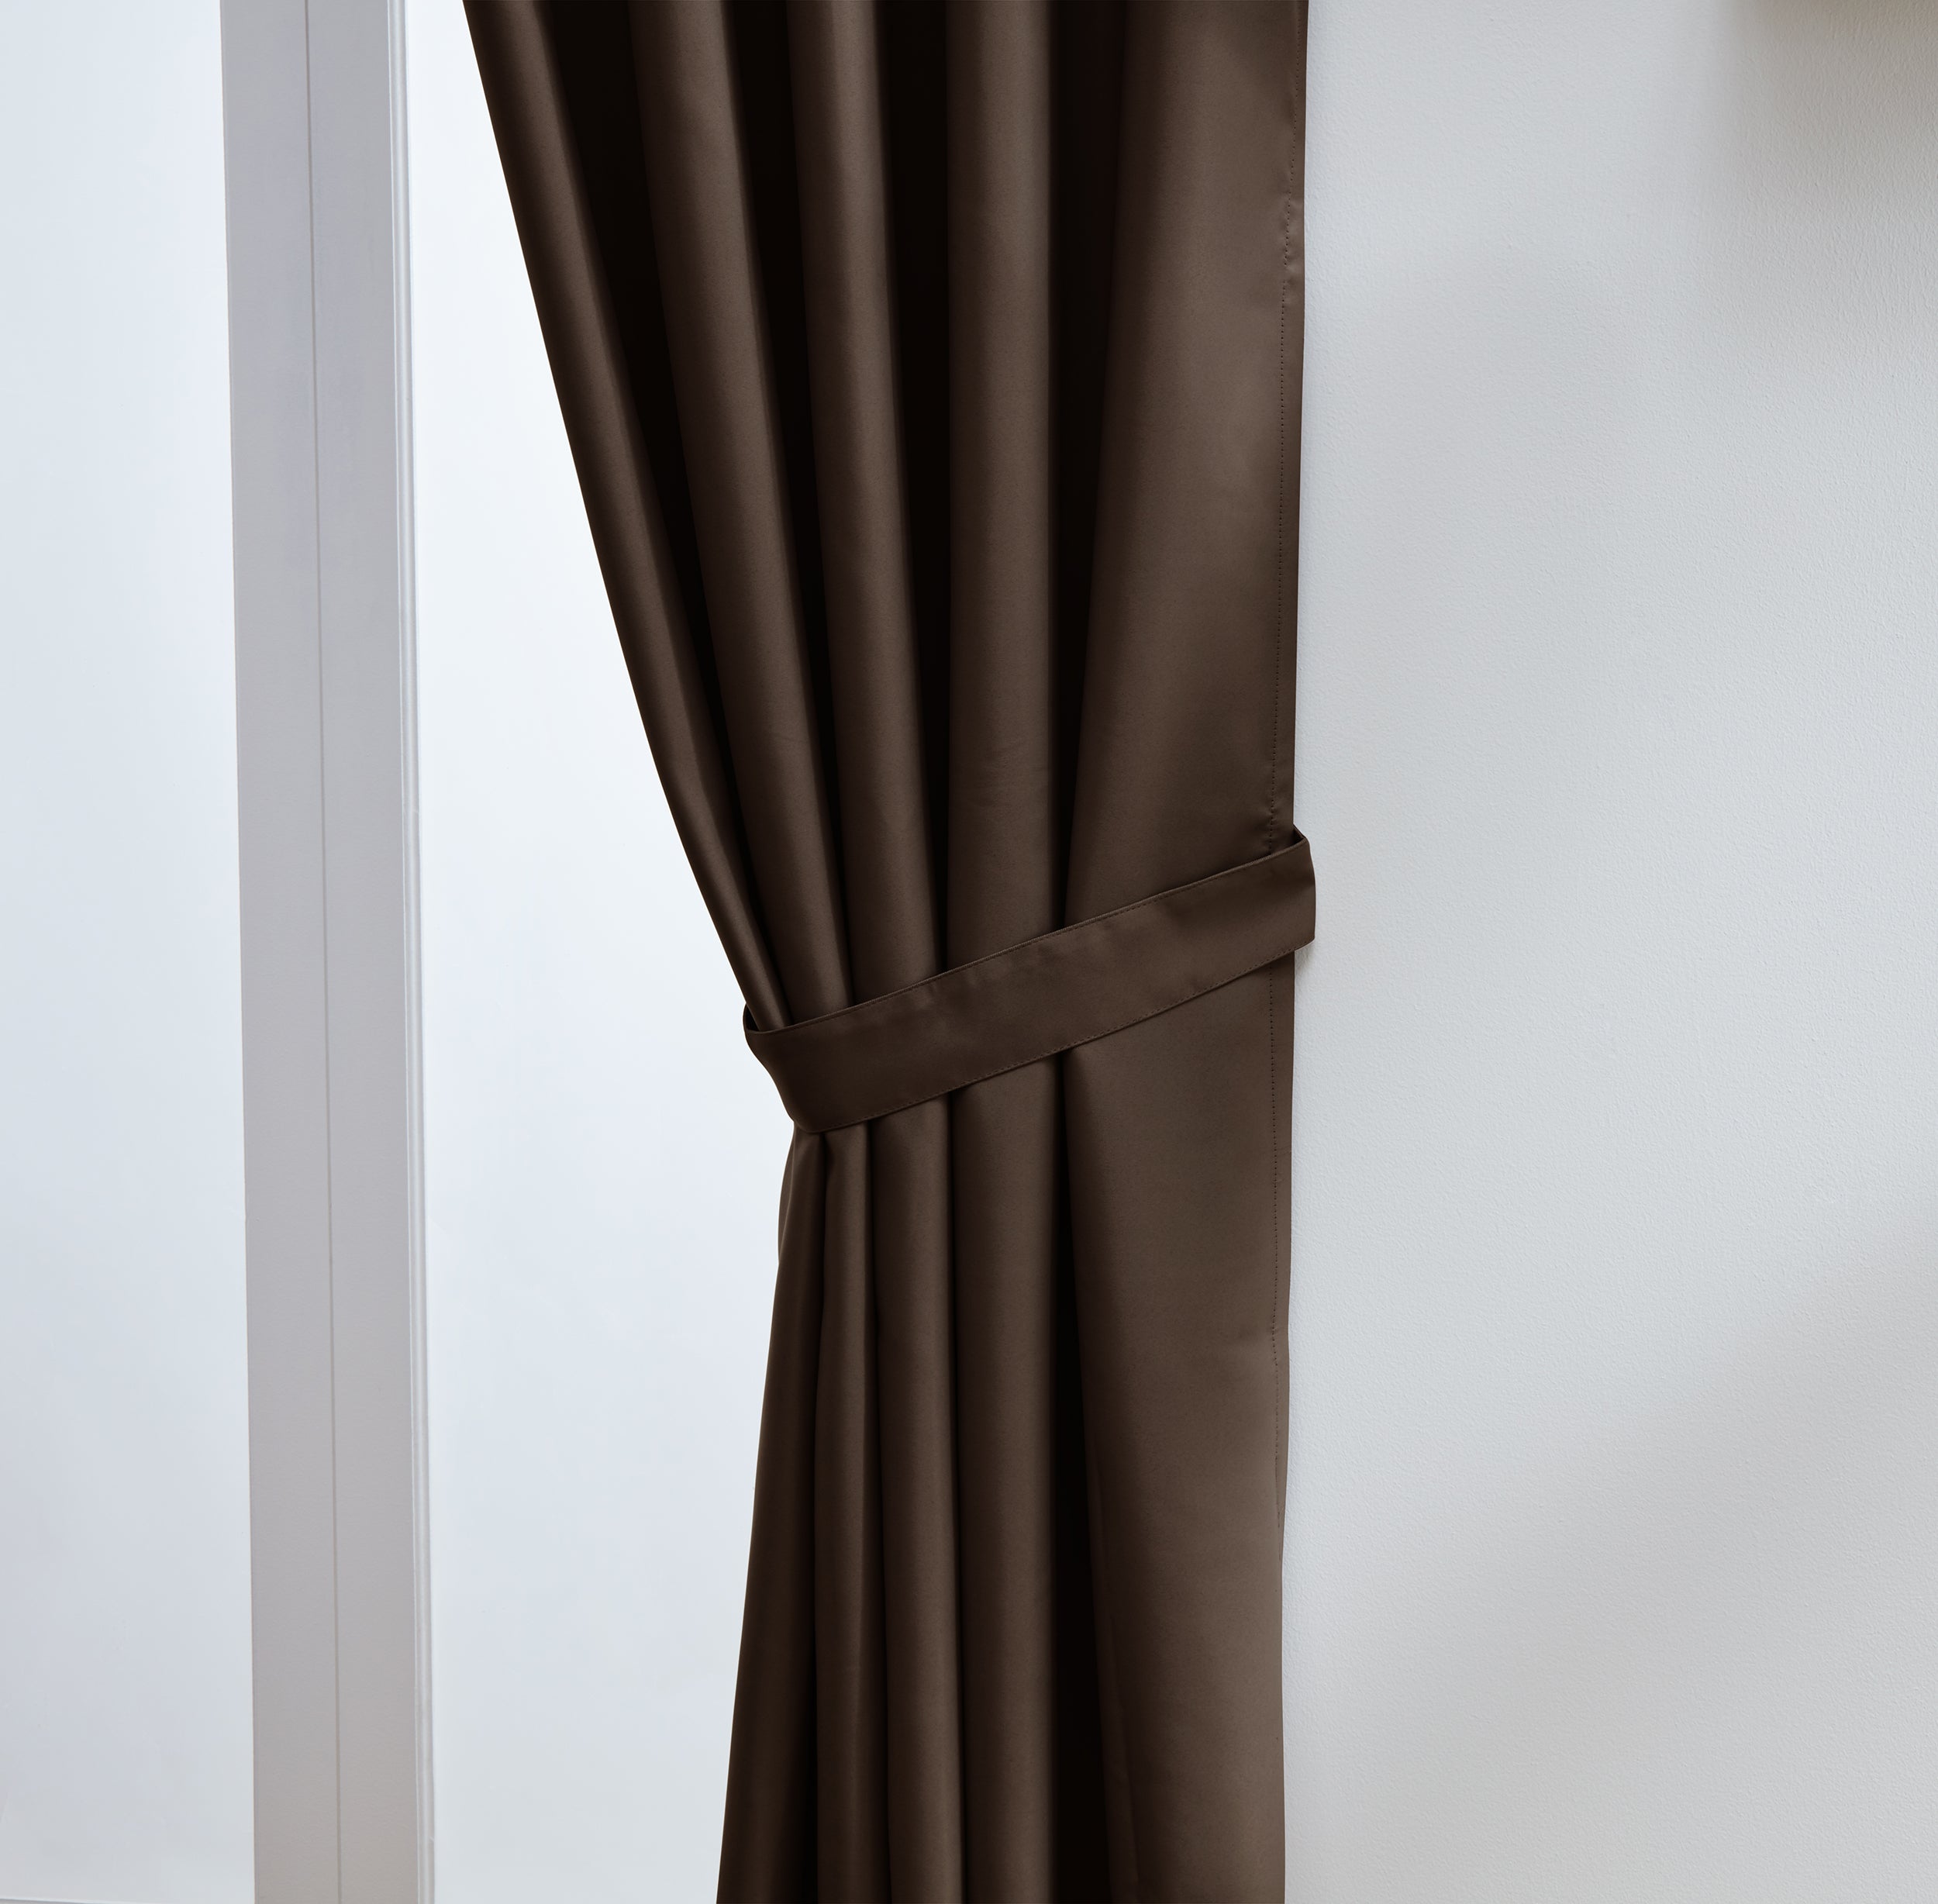 Thermal Blackout Ready Made Tape Top Curtains + Tie Backs (Chocolate)